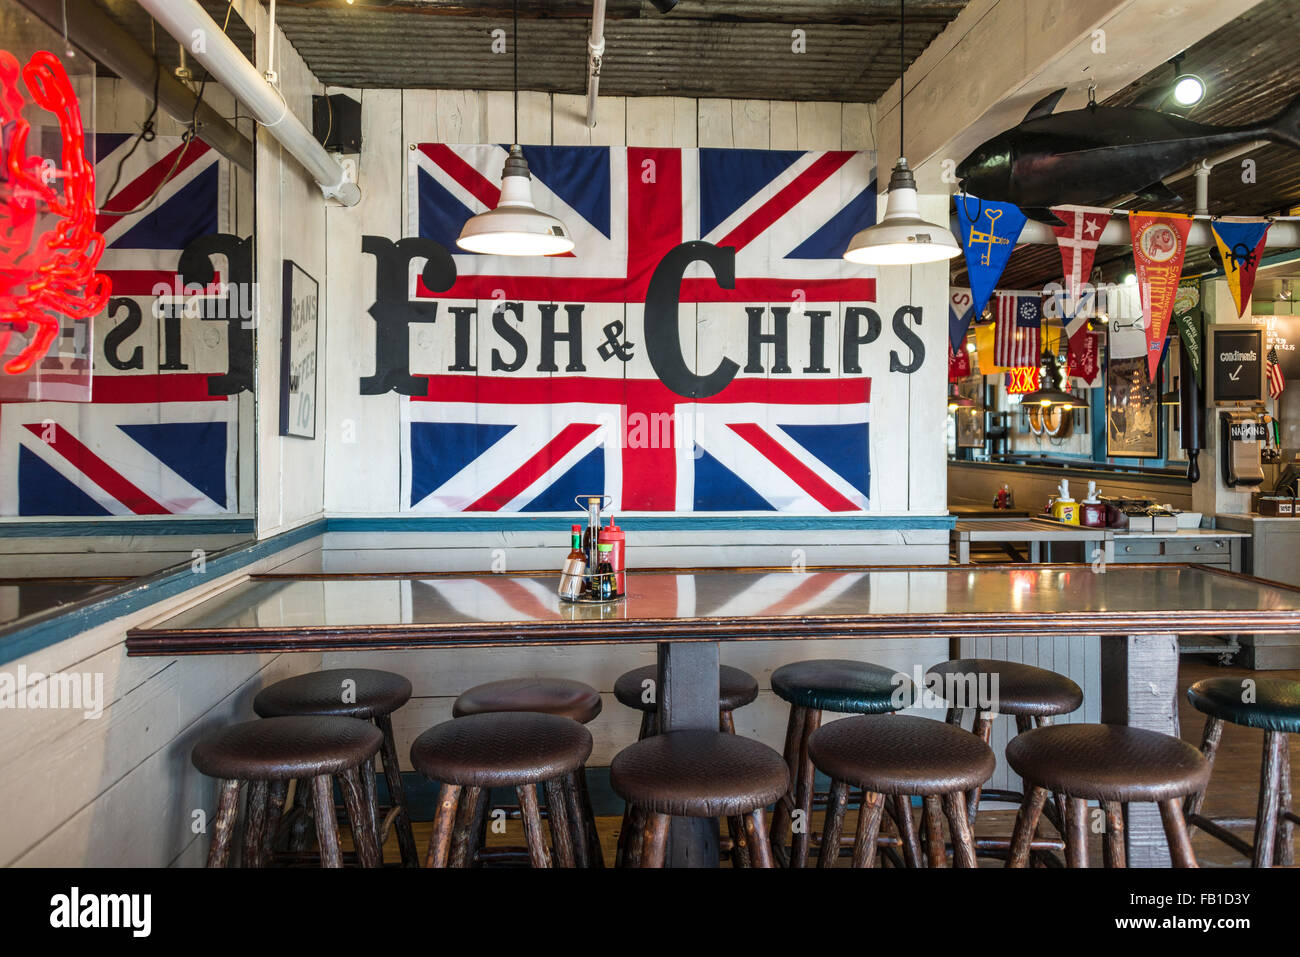 Fish and chips, restaurant on Pier 39, port, San Francisco